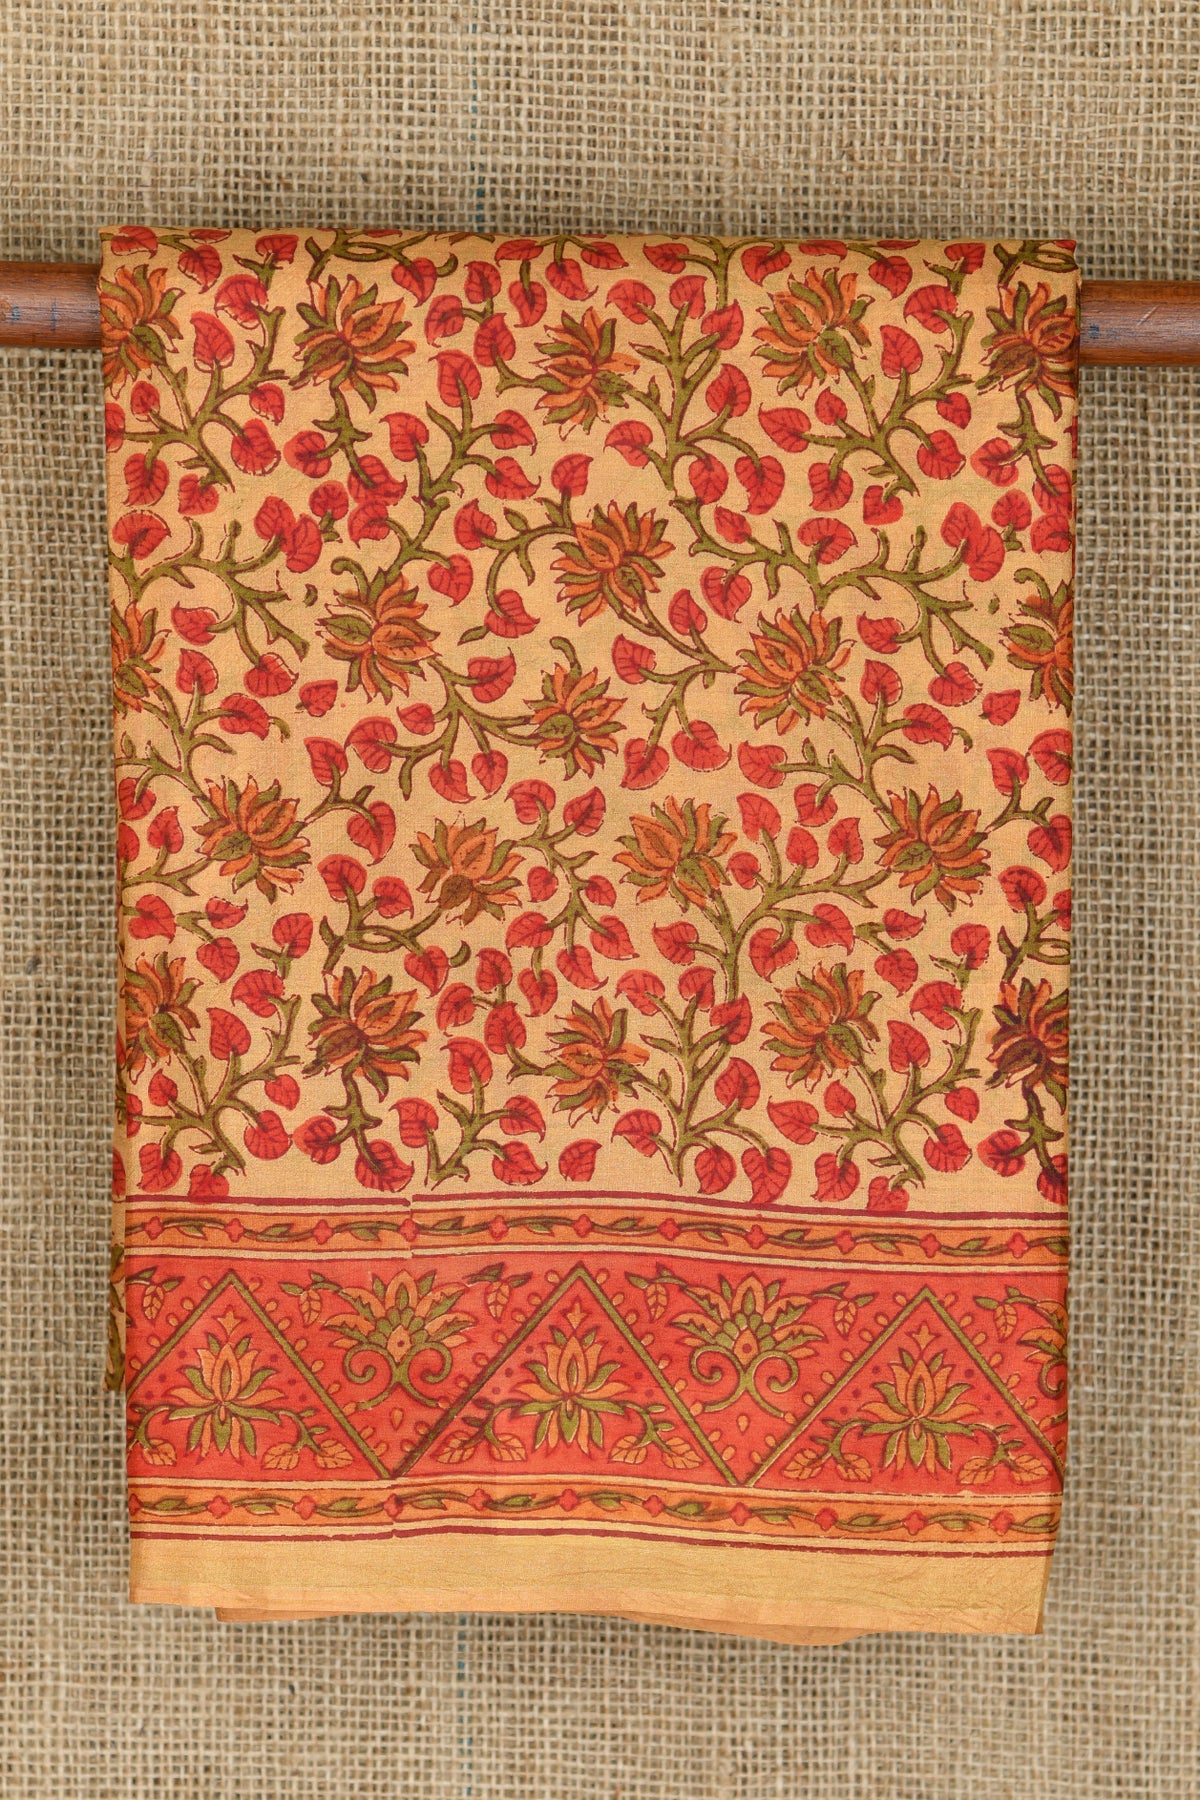 Floral Creepers Design Cream And Red Printed Silk Saree